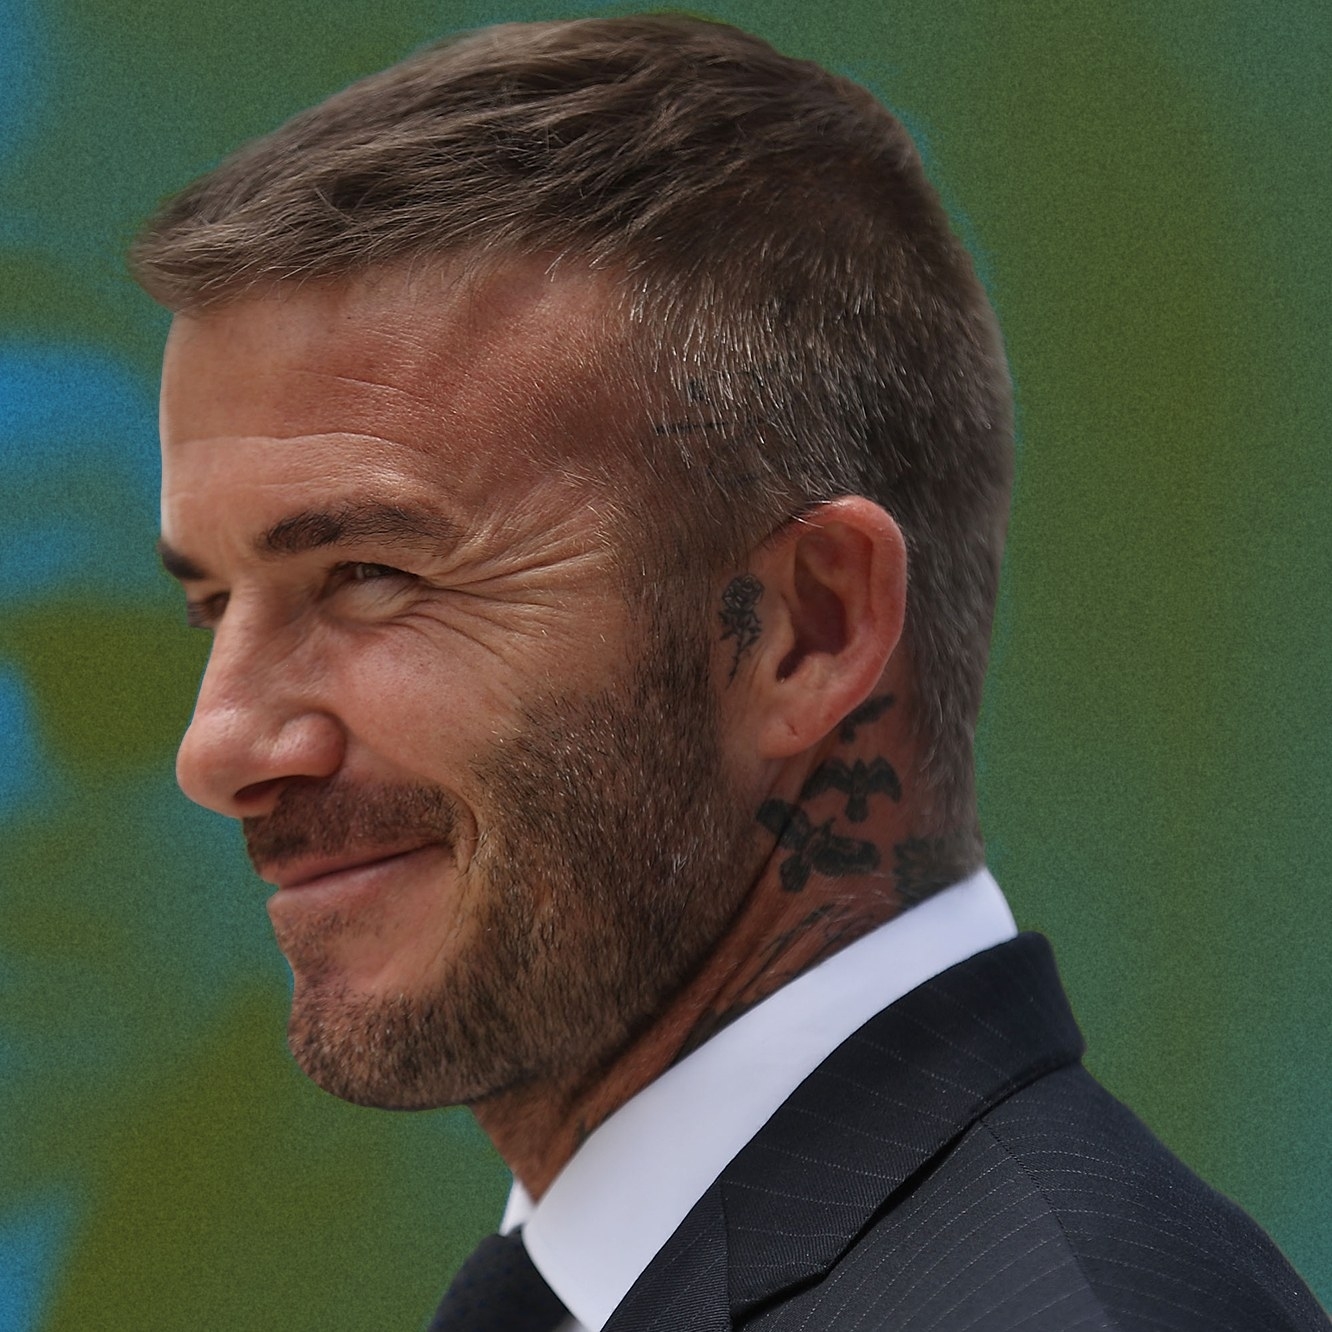 How To Get Every David Beckham Haircut | Gq inside David Beckham Haircut Name